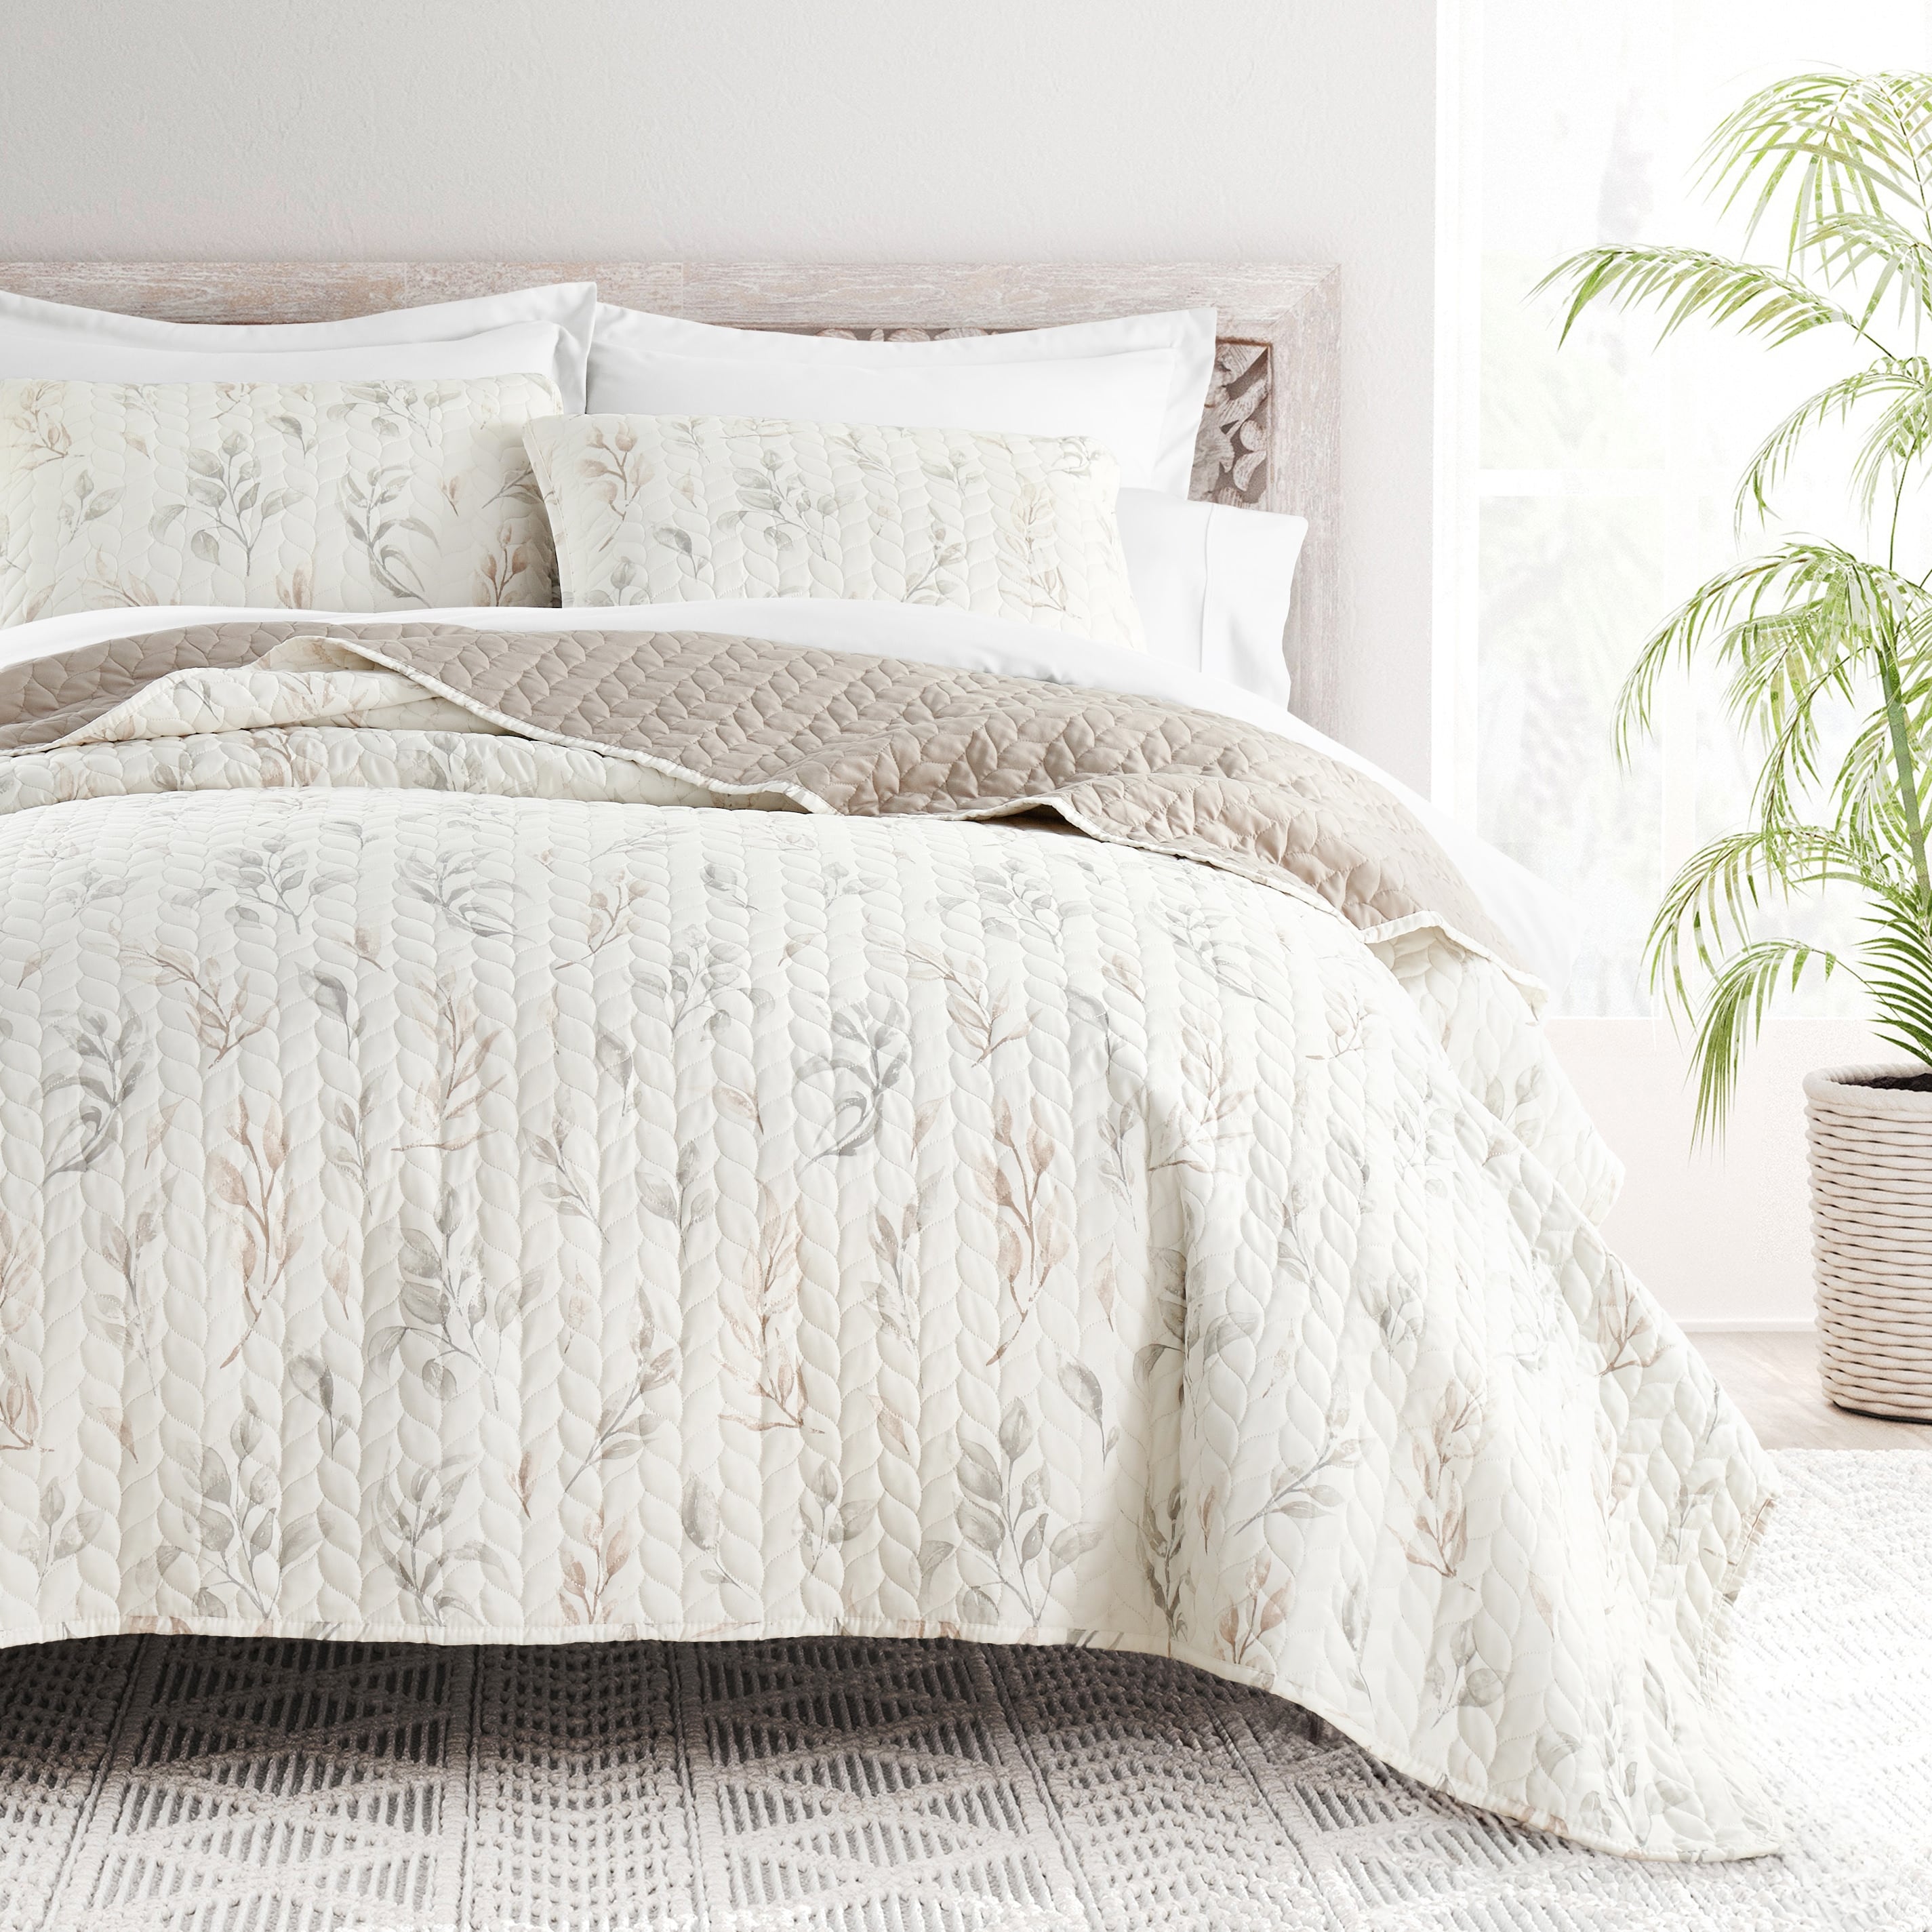 Quilts and Bedspreads - Bed Bath & Beyond